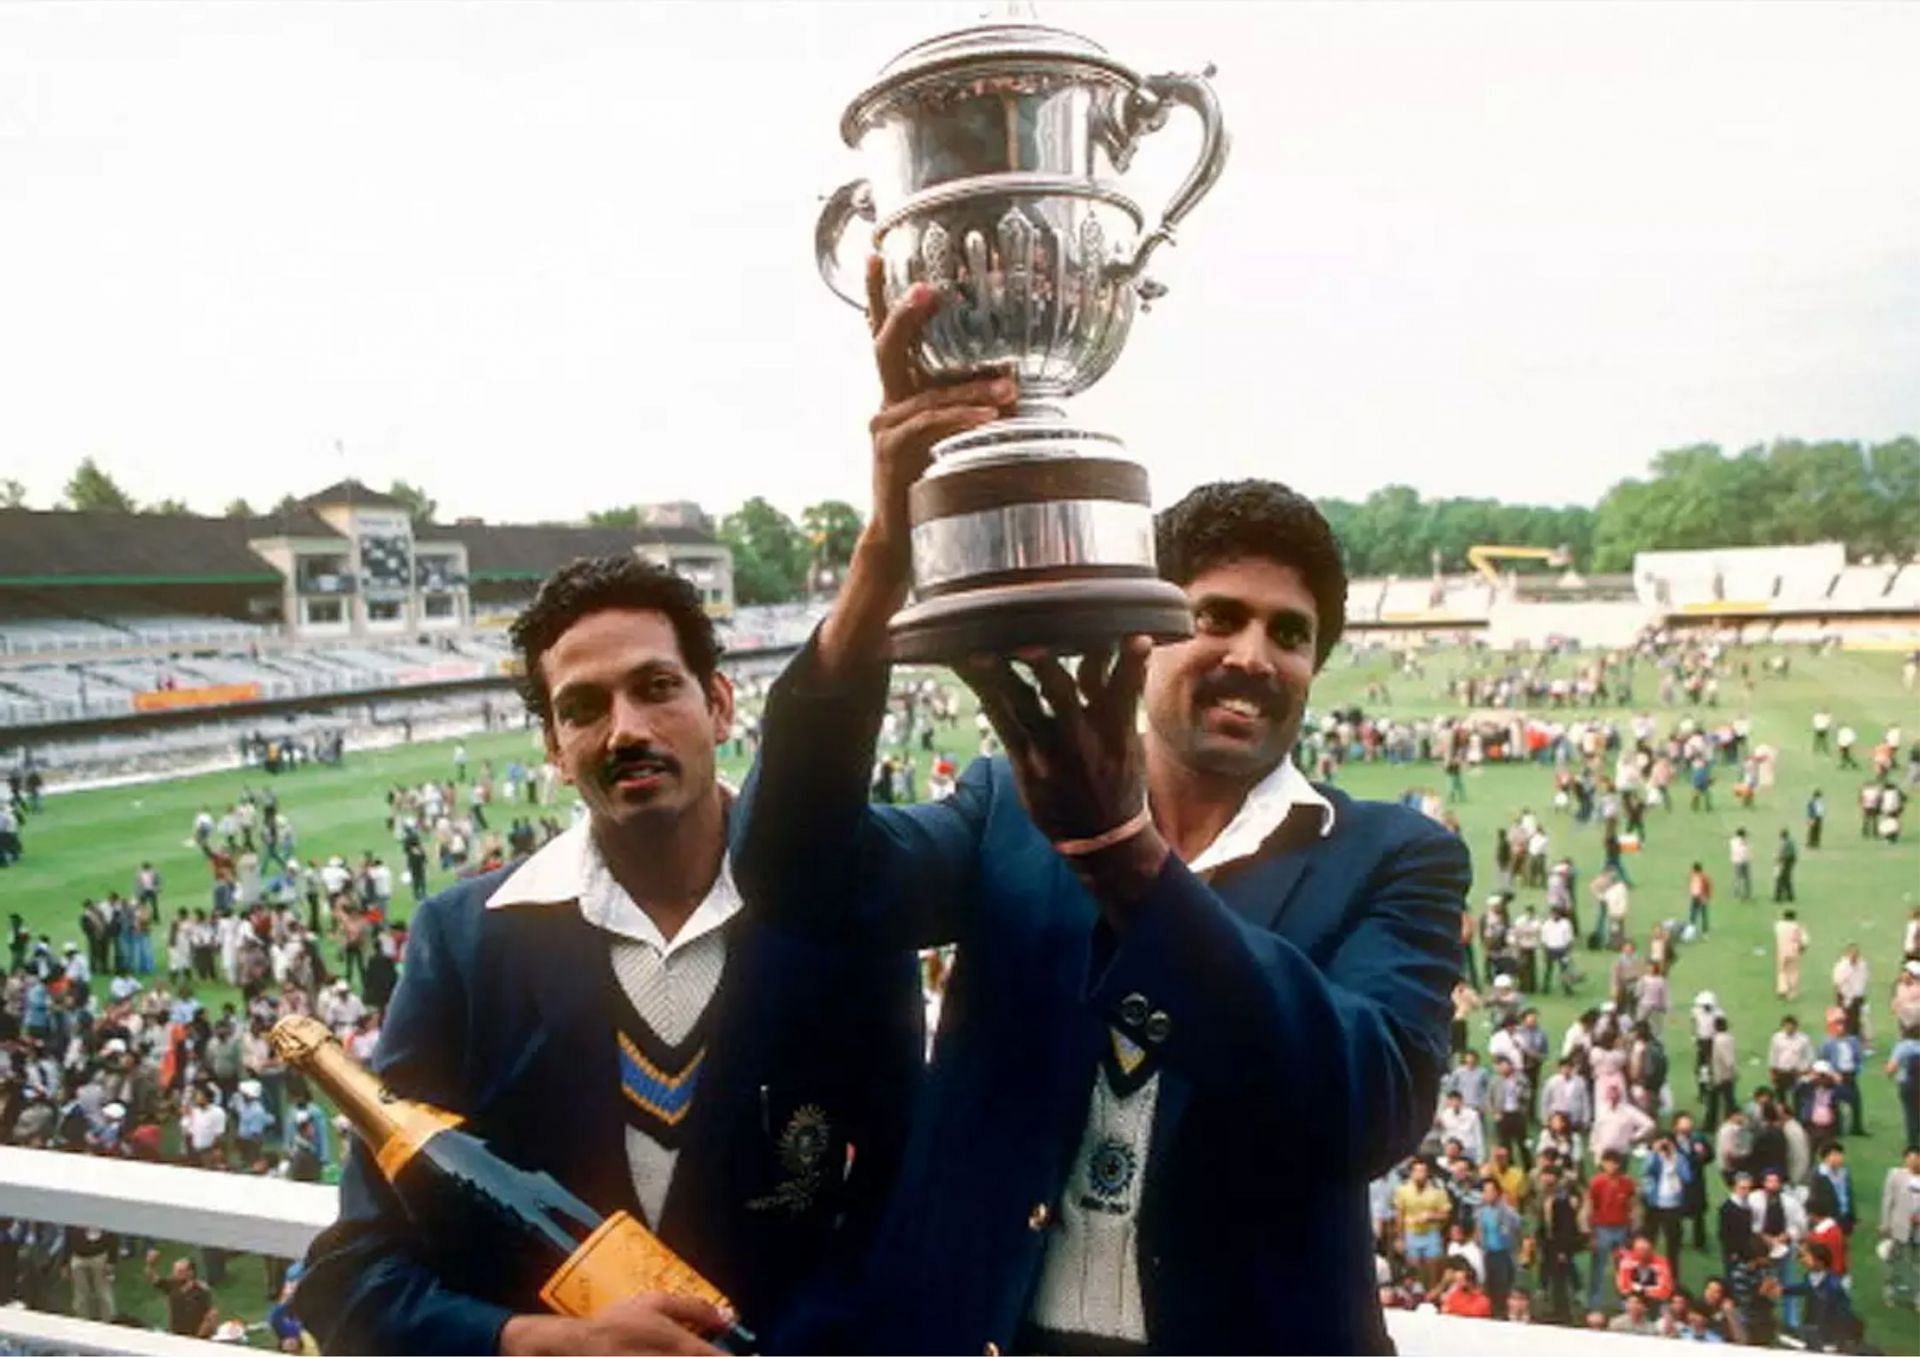 The 1983 World Cup victory was truly a pathbreaker in Indian cricket (Picture Credits: Patrick Eager/Popperfoto via Getty Images)